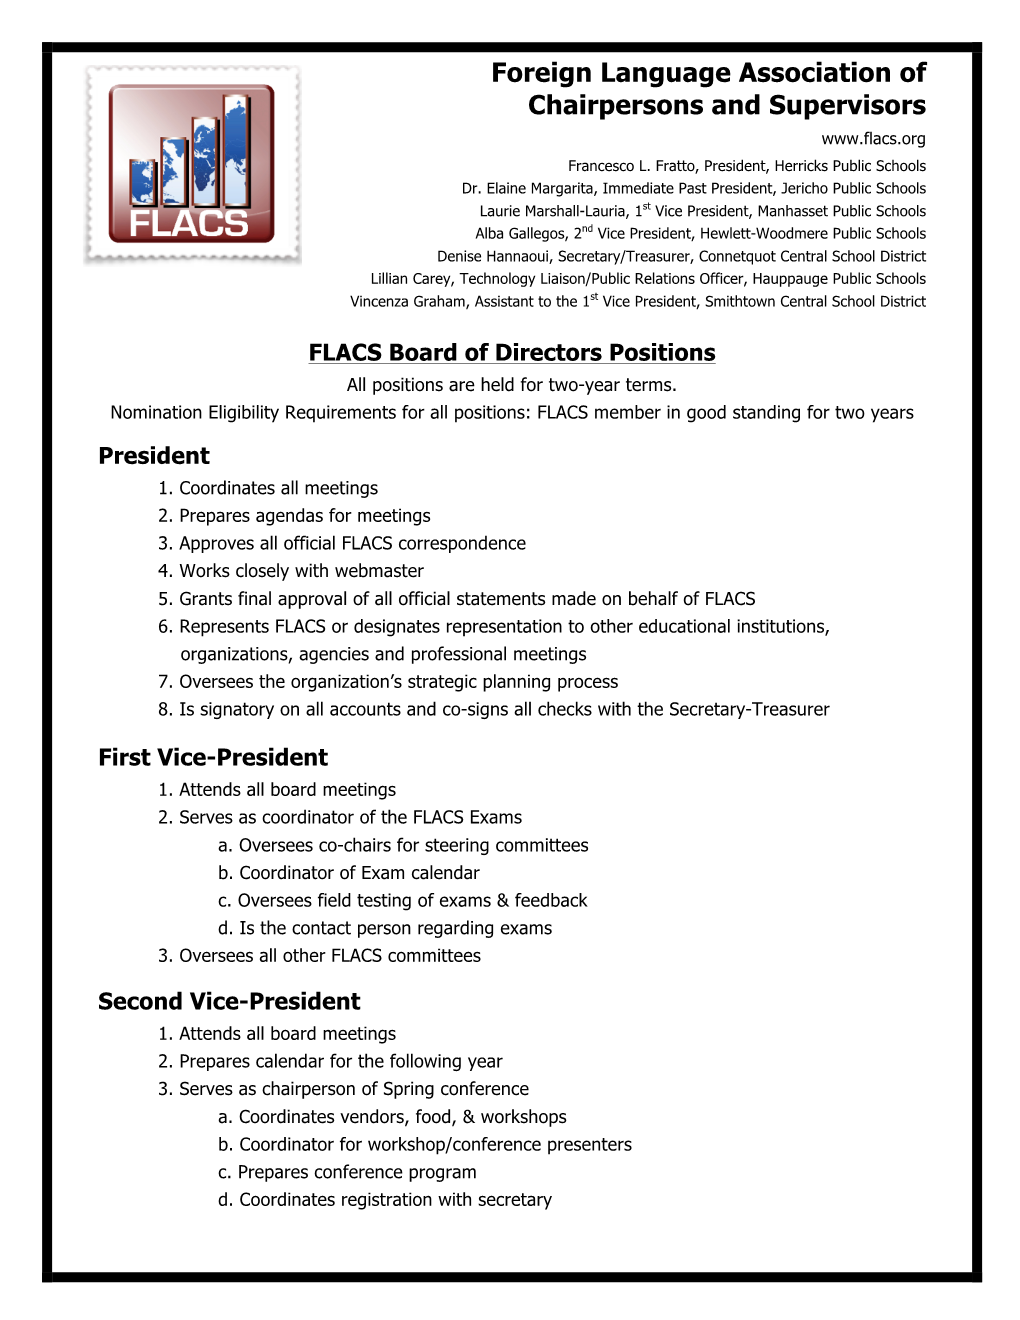 FLACS Board of Directors Positions All Positions Are Held for Two-Year Terms